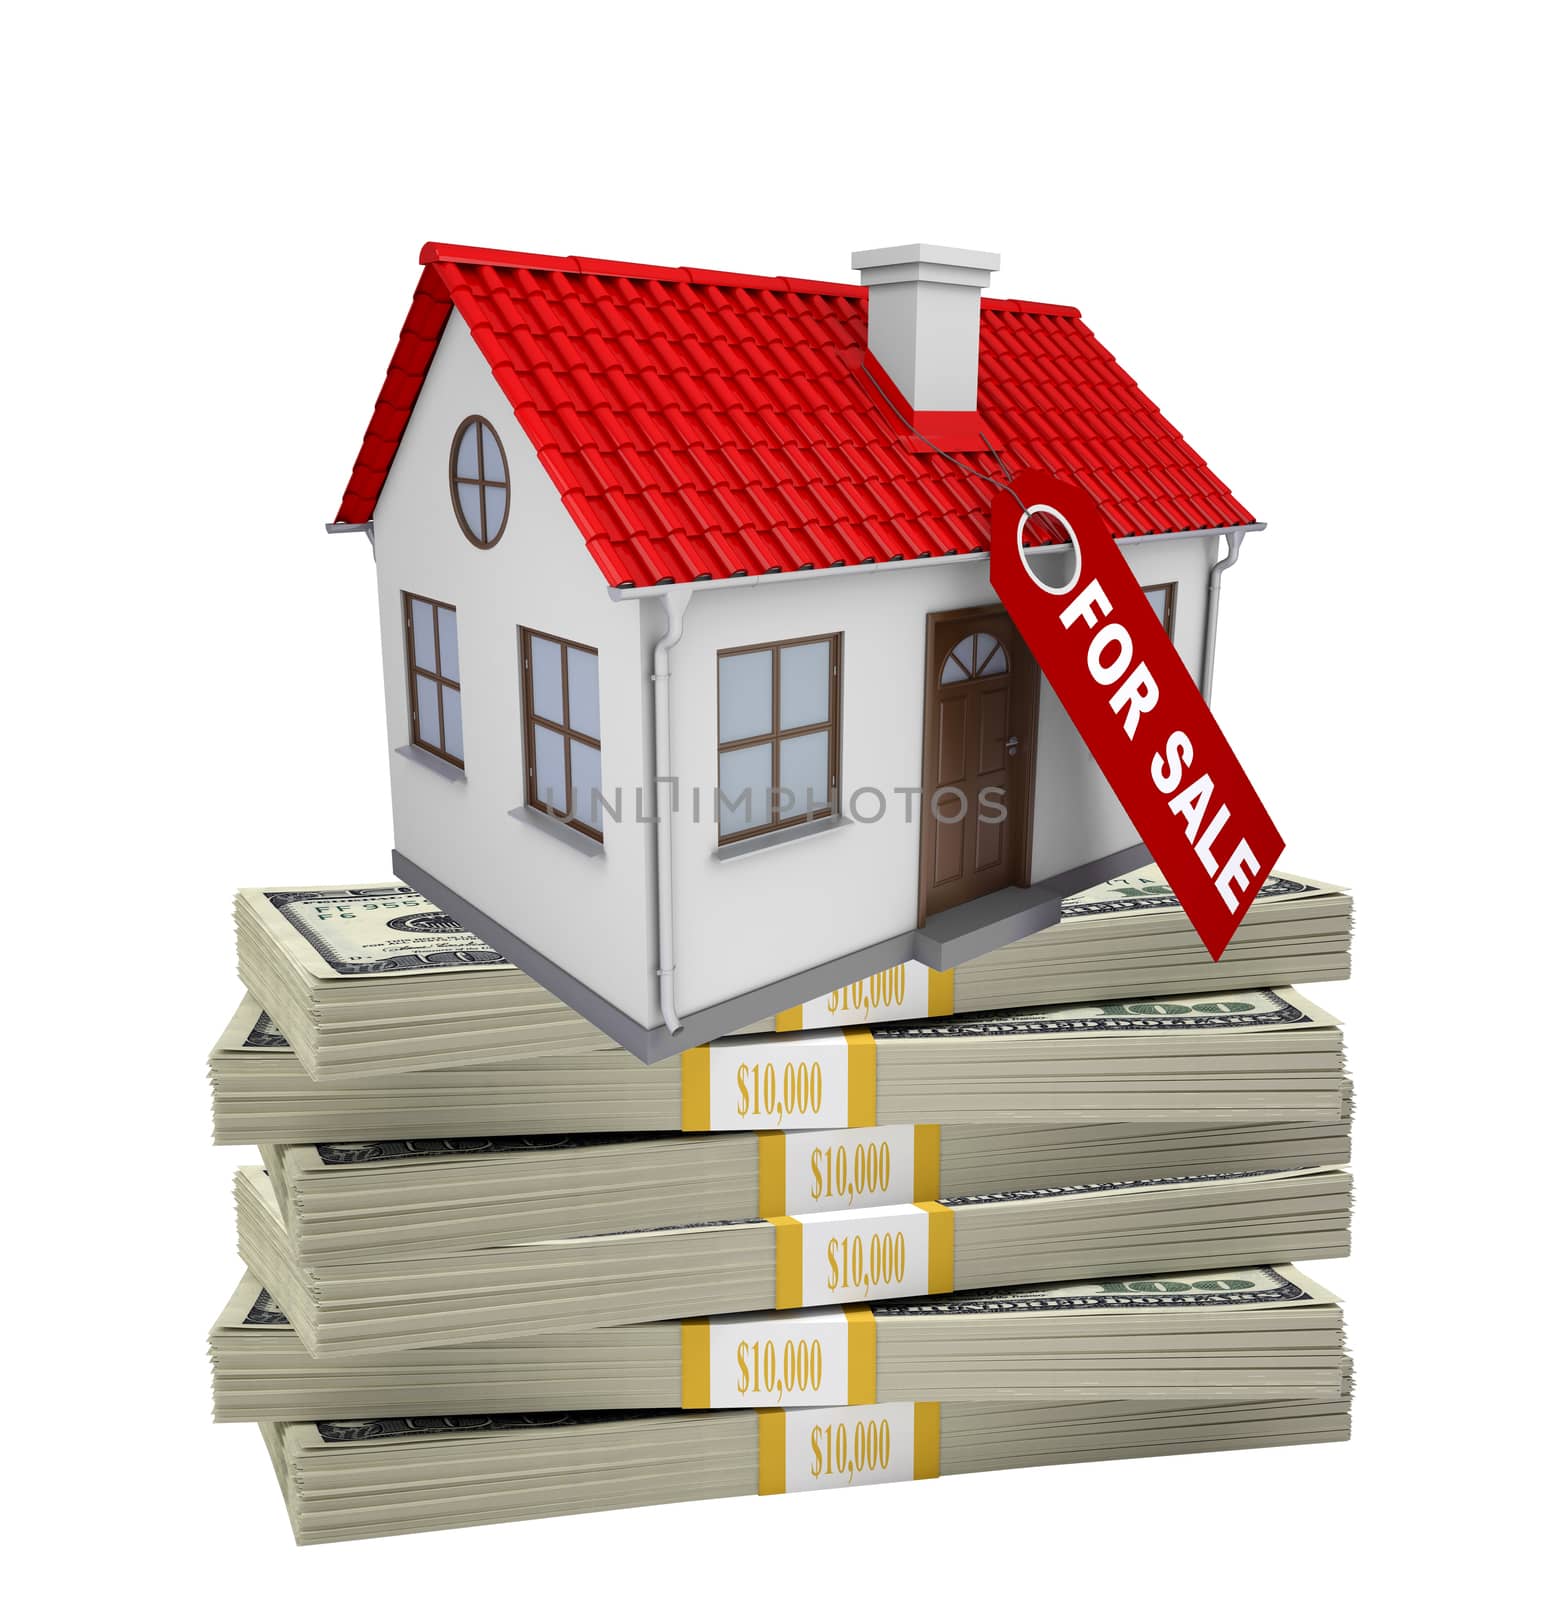 House for sale on pile of money on isolated white background